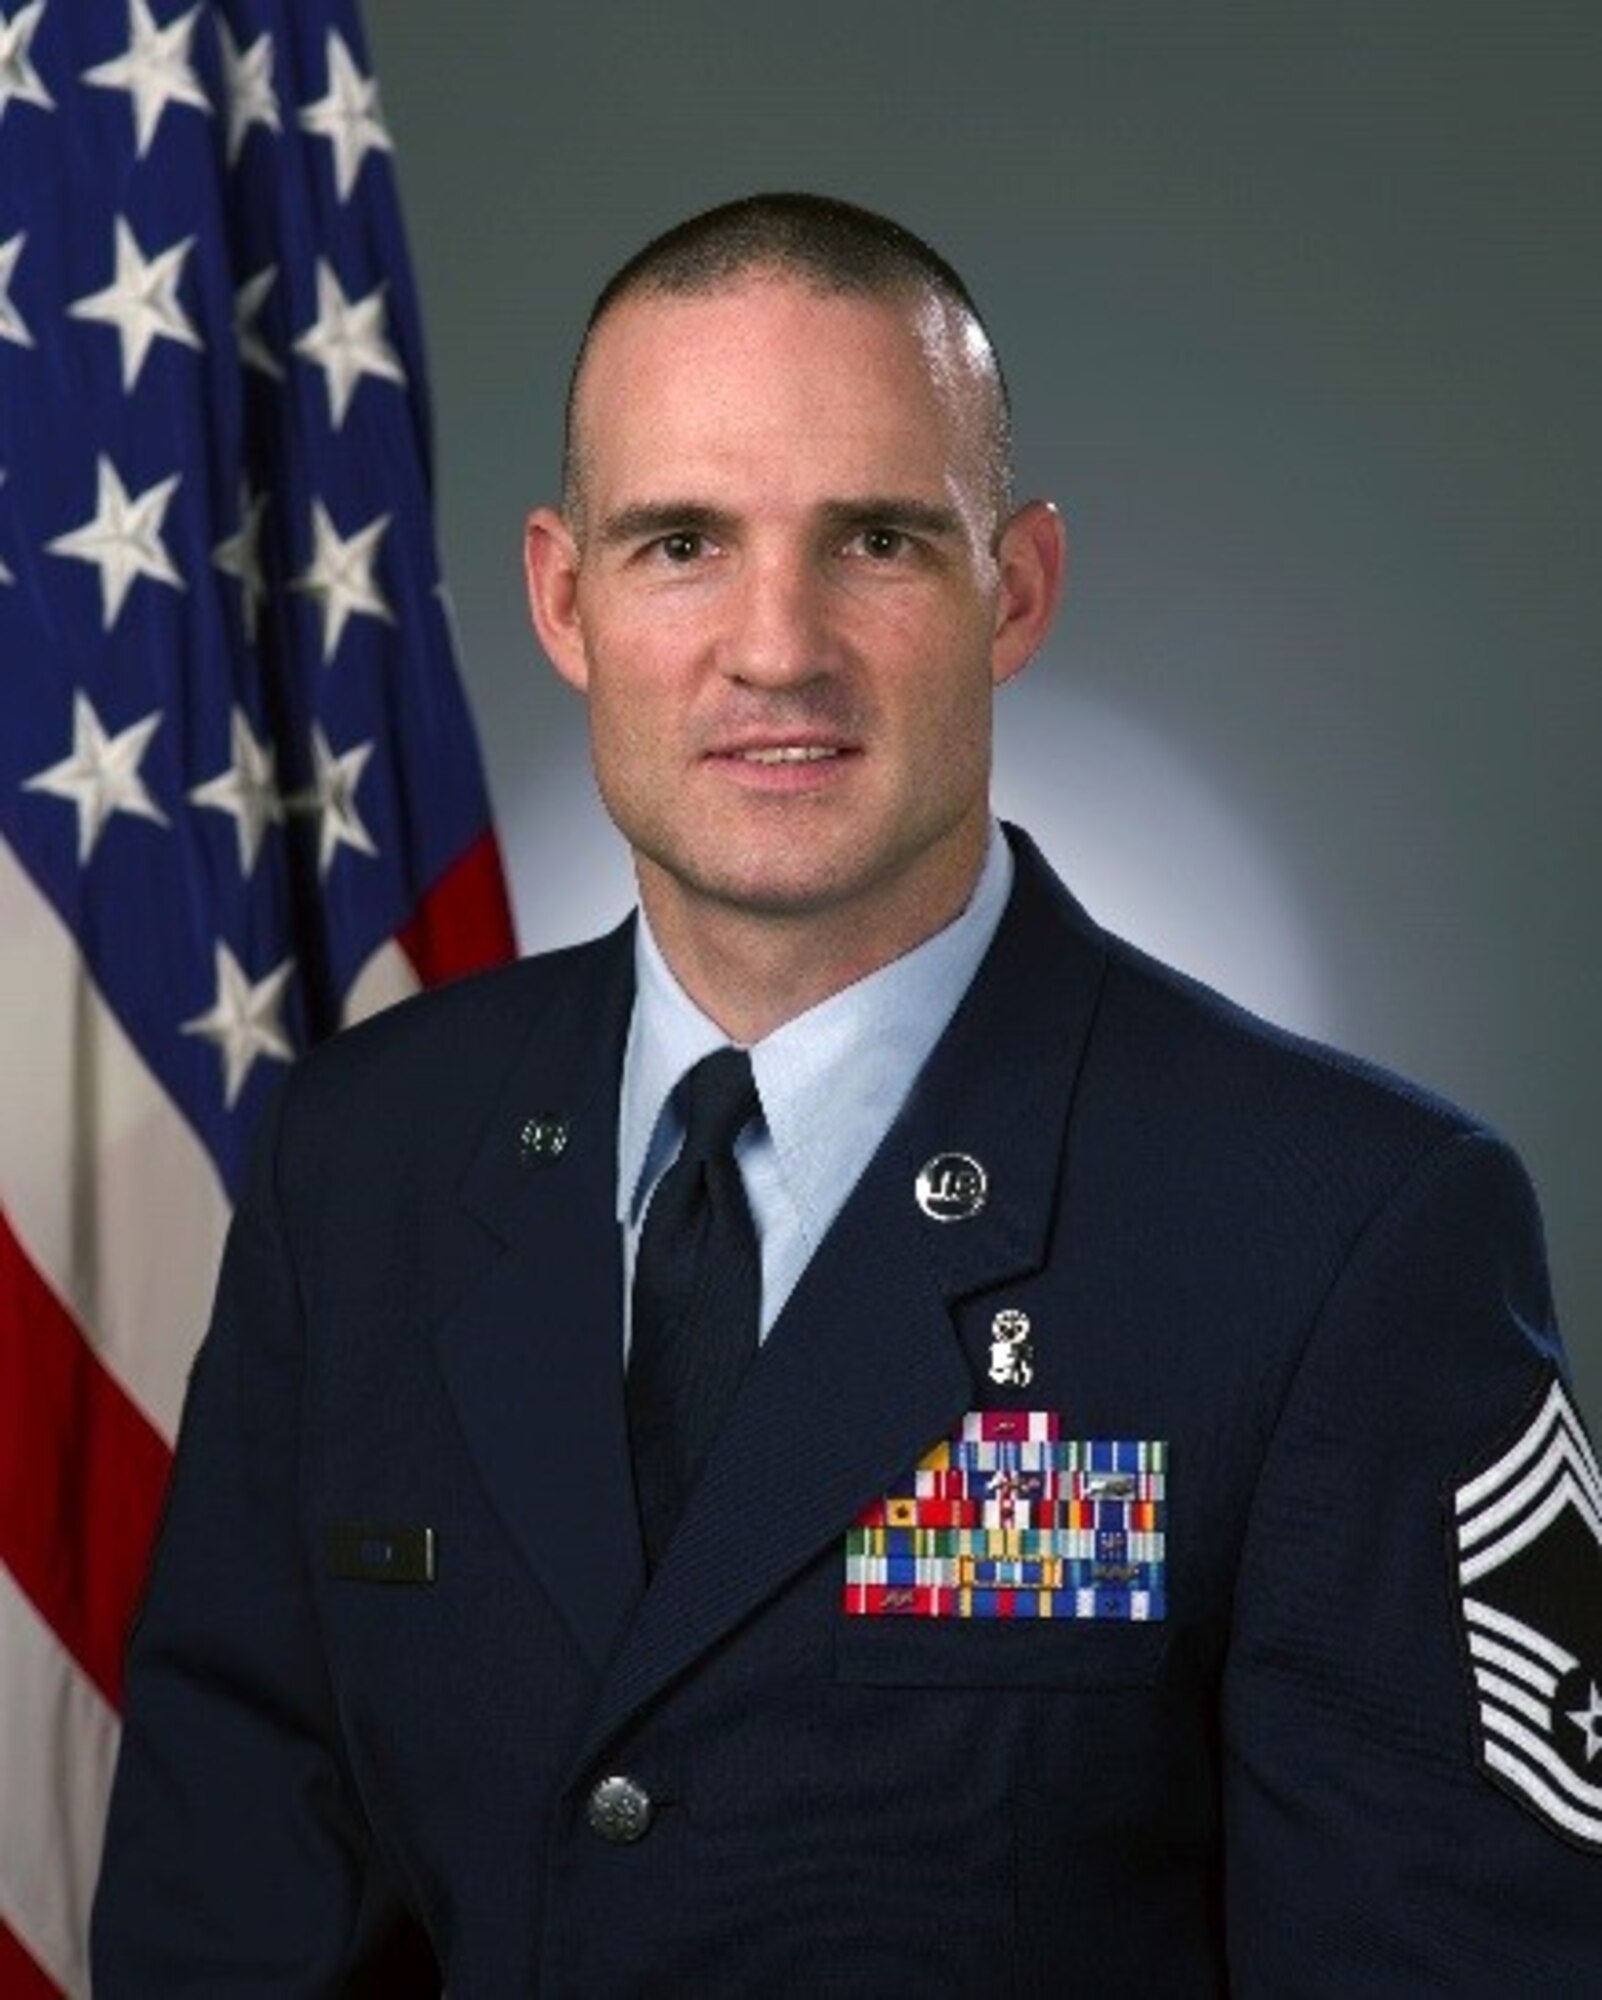 Commentary by Chief Master Sgt. Justin Helin, 60th Medical Support Squadron